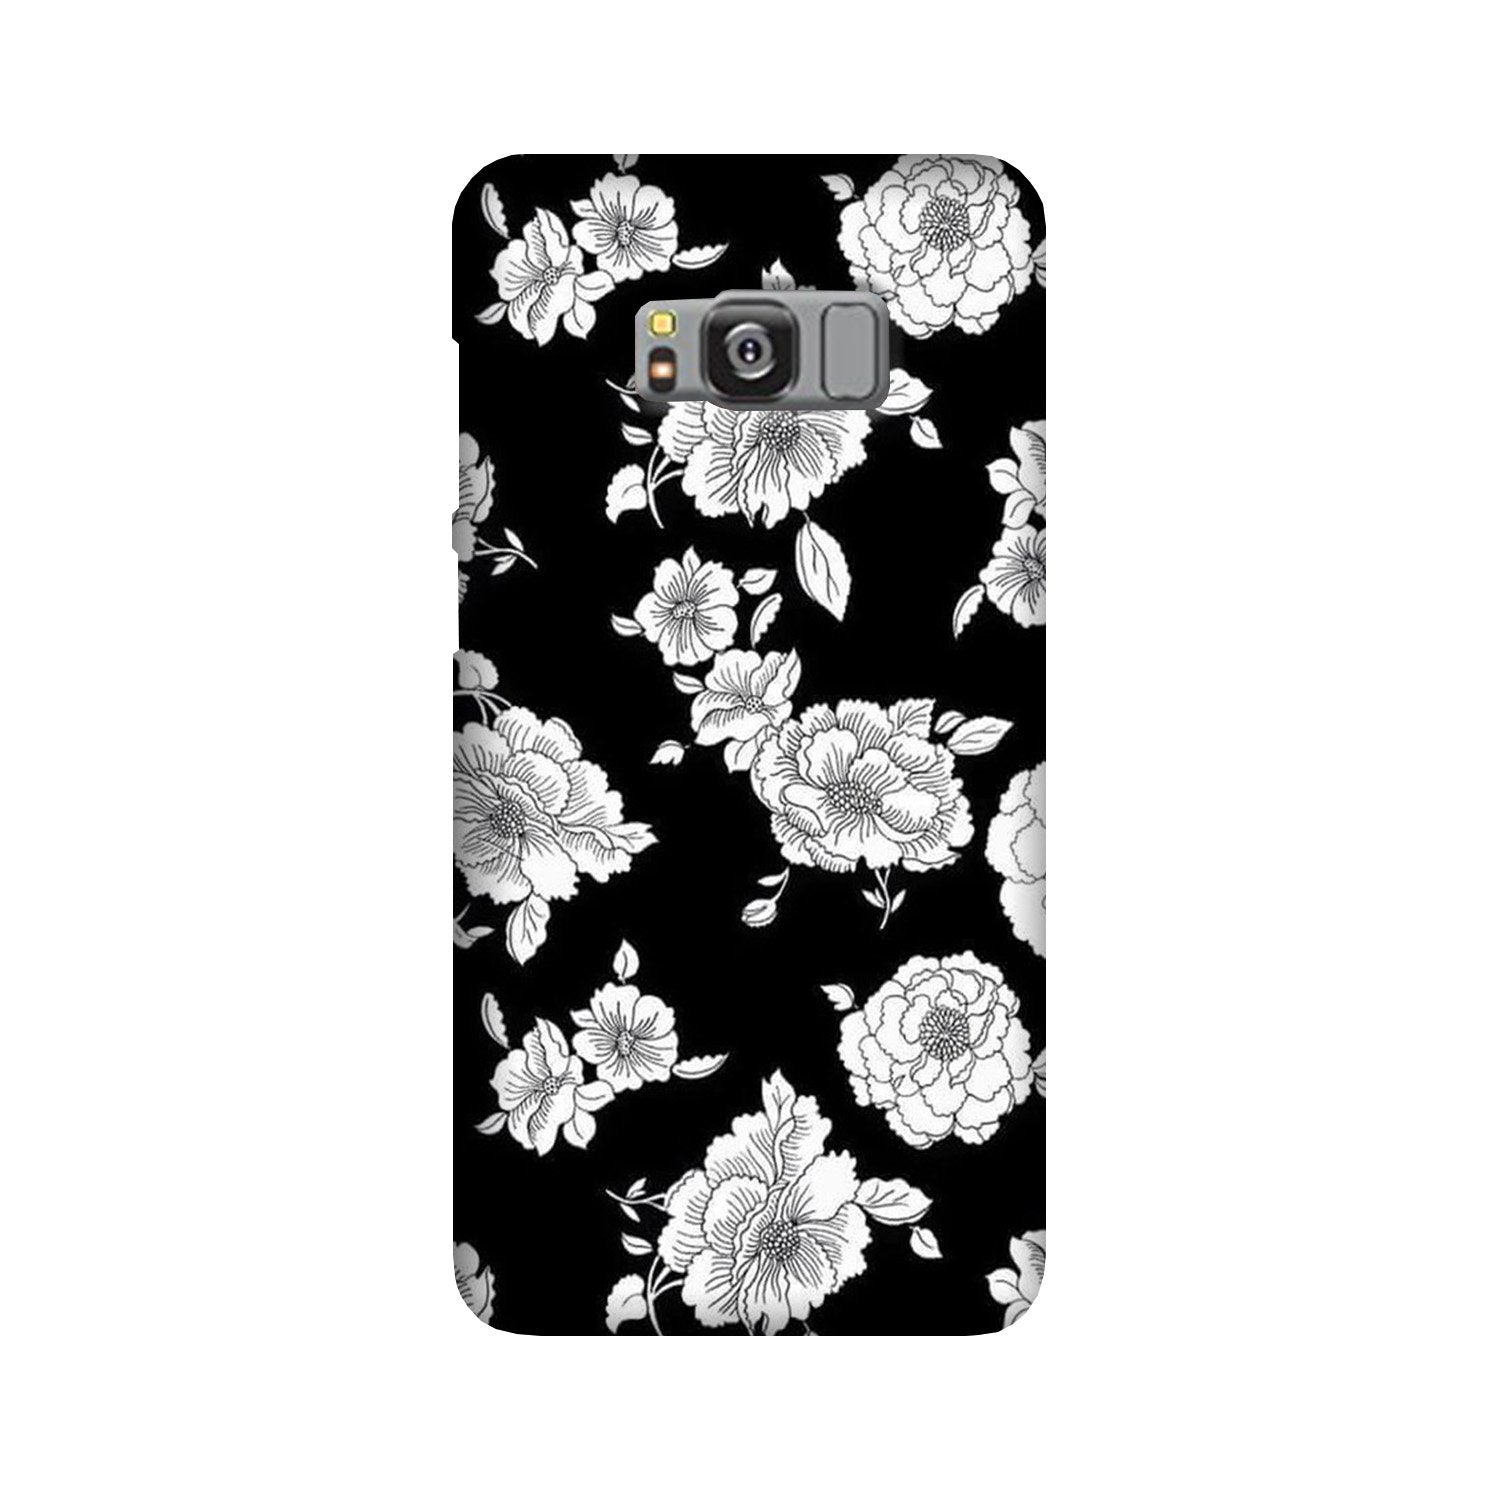 White flowers Black Background Case for Galaxy S8